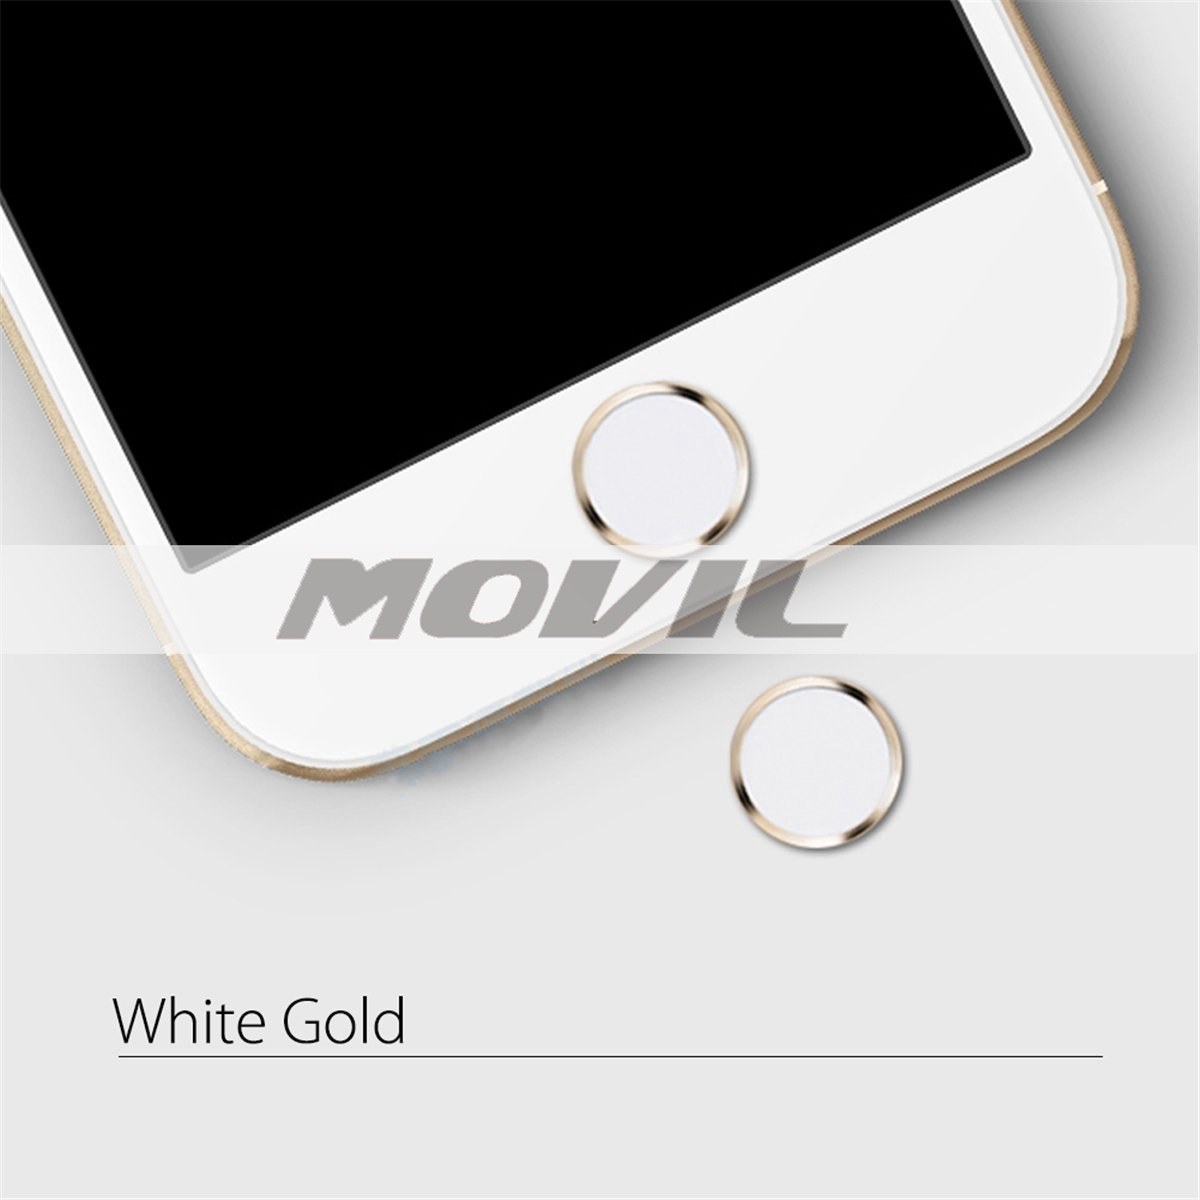 0.4mm Home Button Sticker(support Fingerprint Indentification System Touch Id)for Iphone 5s Iphone 6 Iphone 6 Plus ( Gold ring Black)